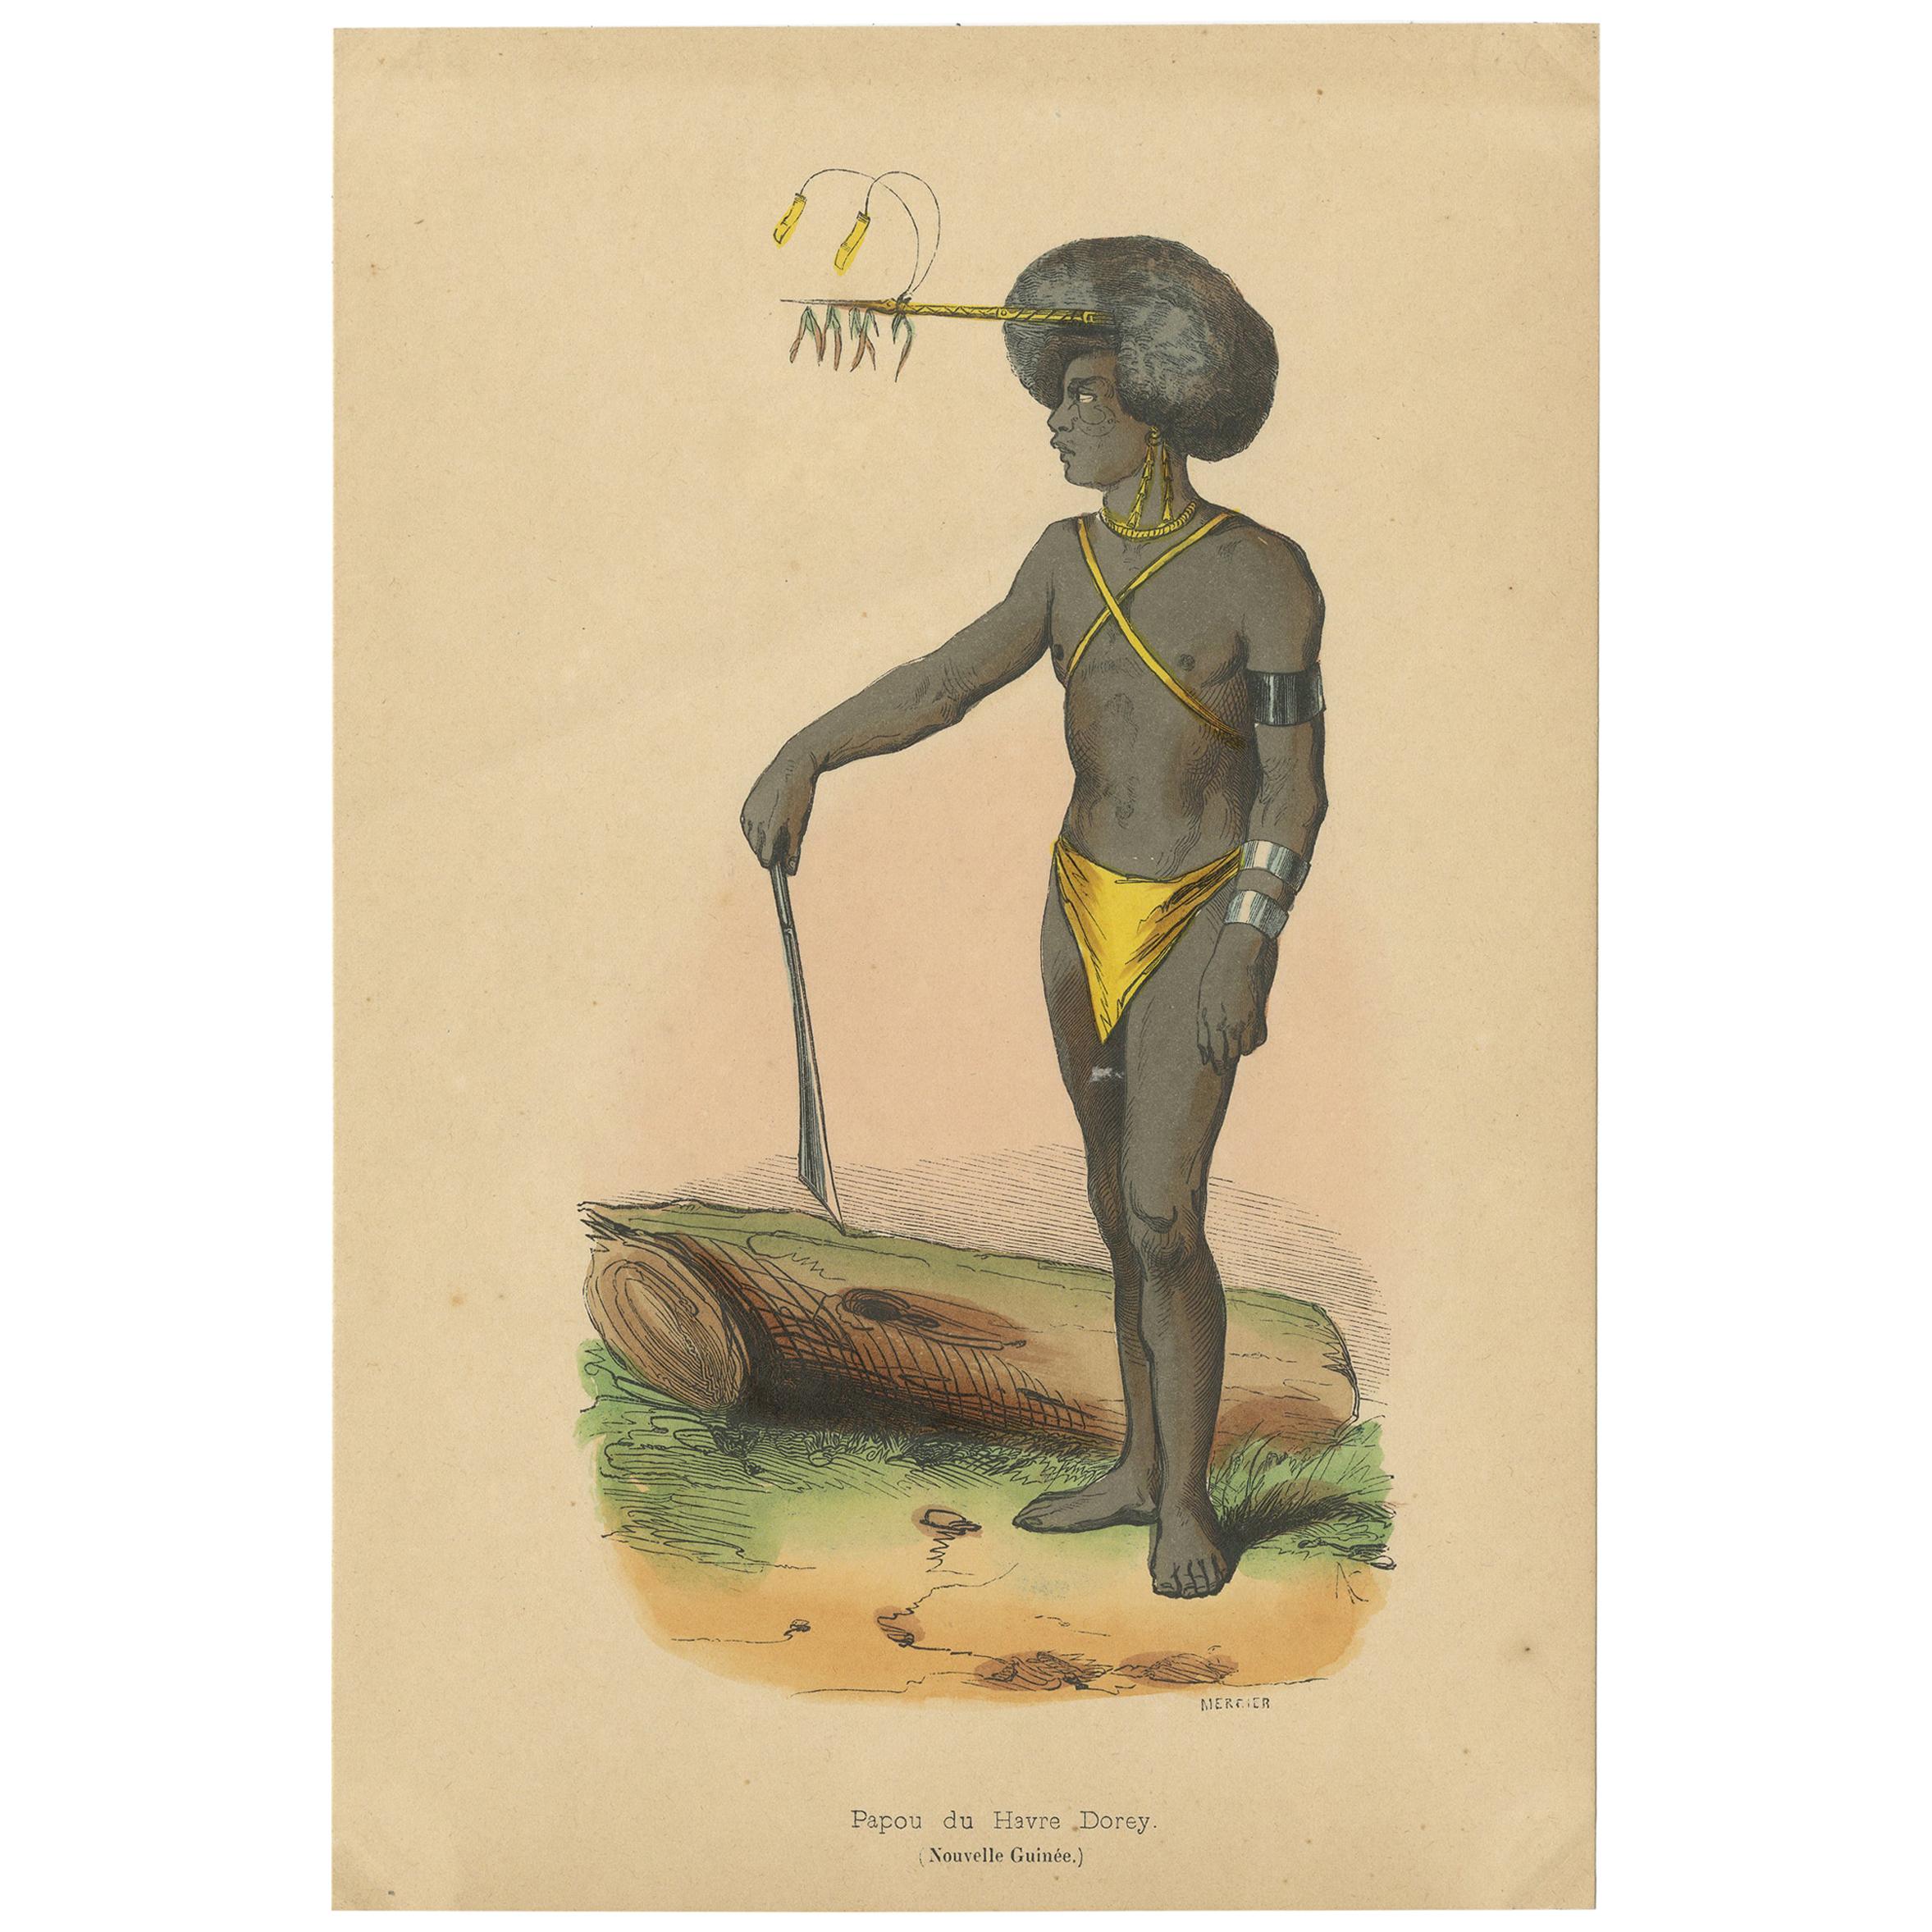 Antique Costume Print of a Papua from Dorey Harbour by Wahlen, 1843